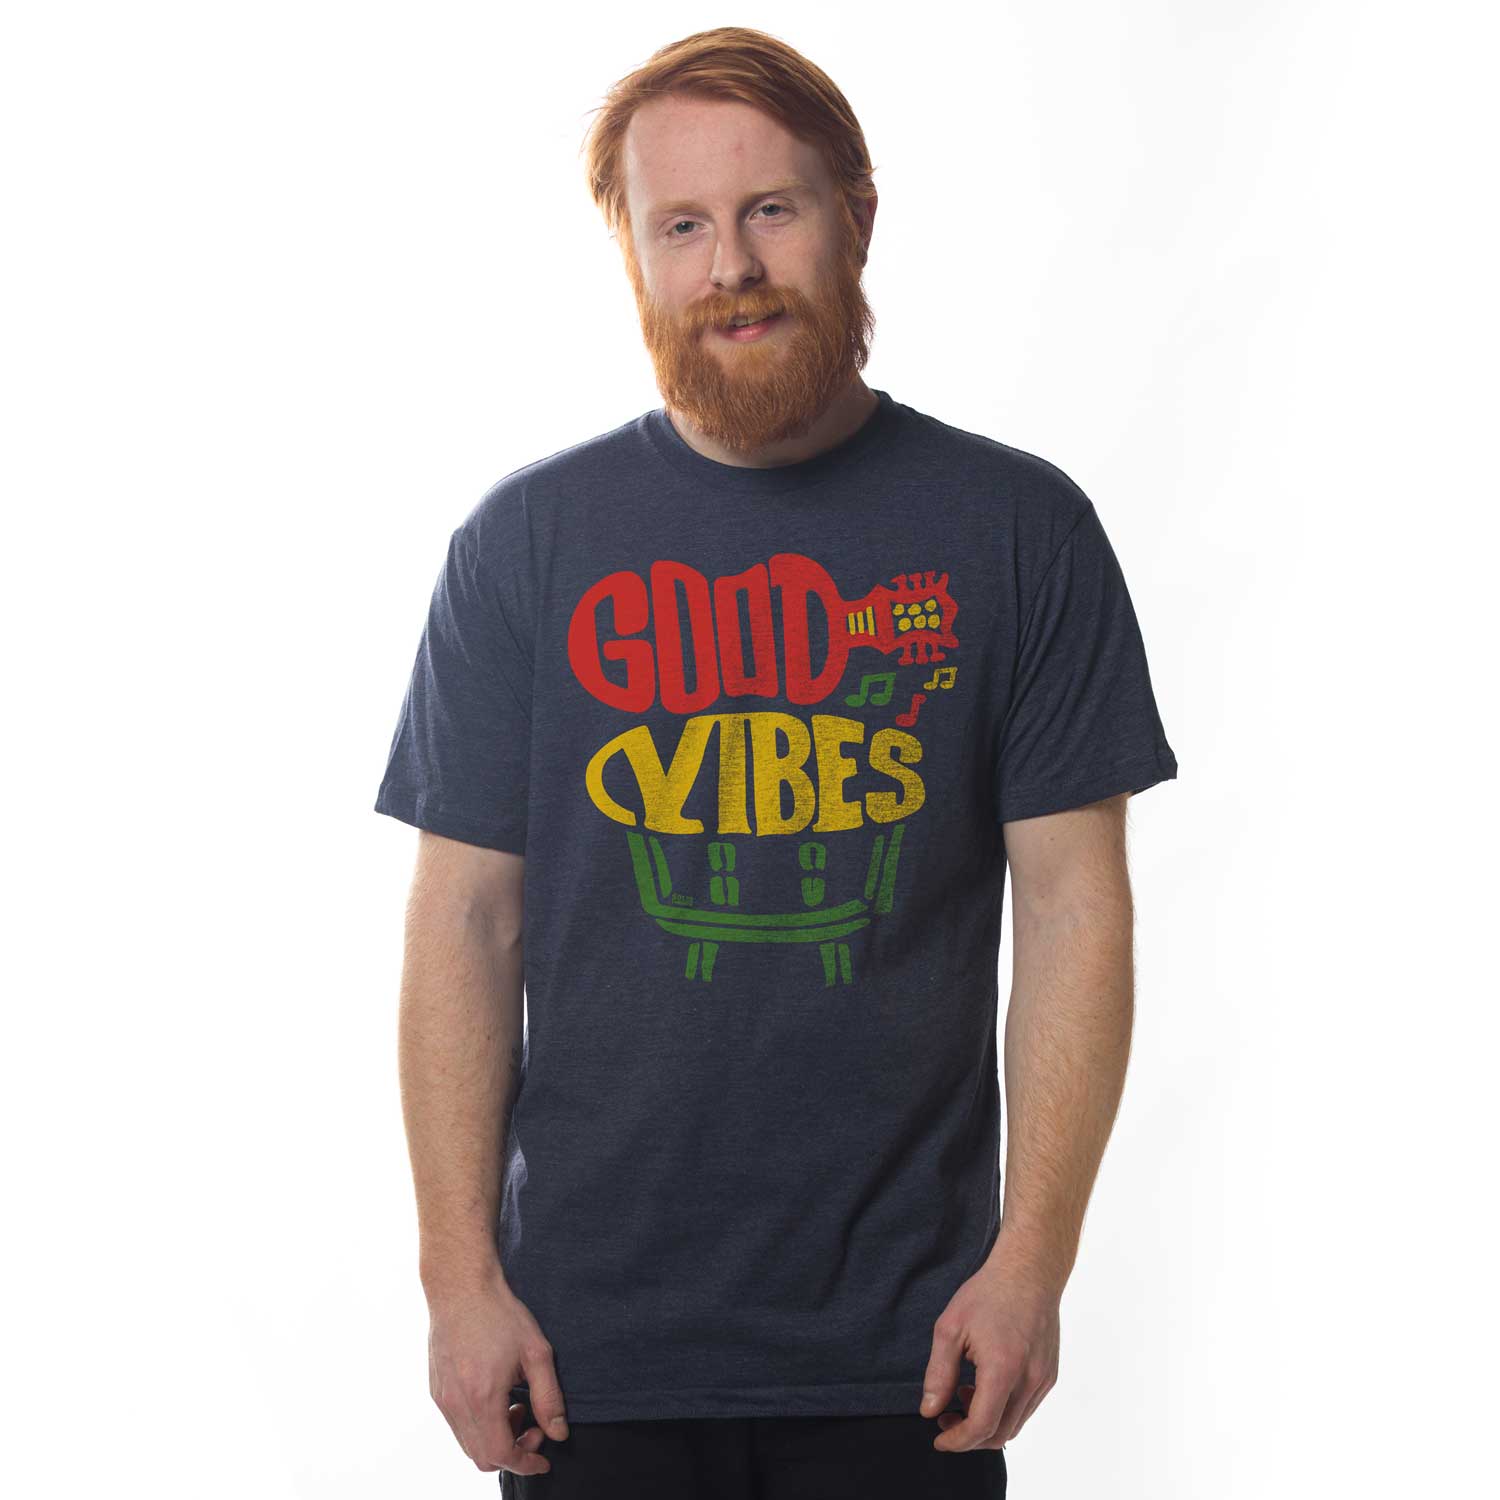 Men's Good Vibes Vintage Graphic Tee | Retro Music T-shirt on Model | Solid Threads